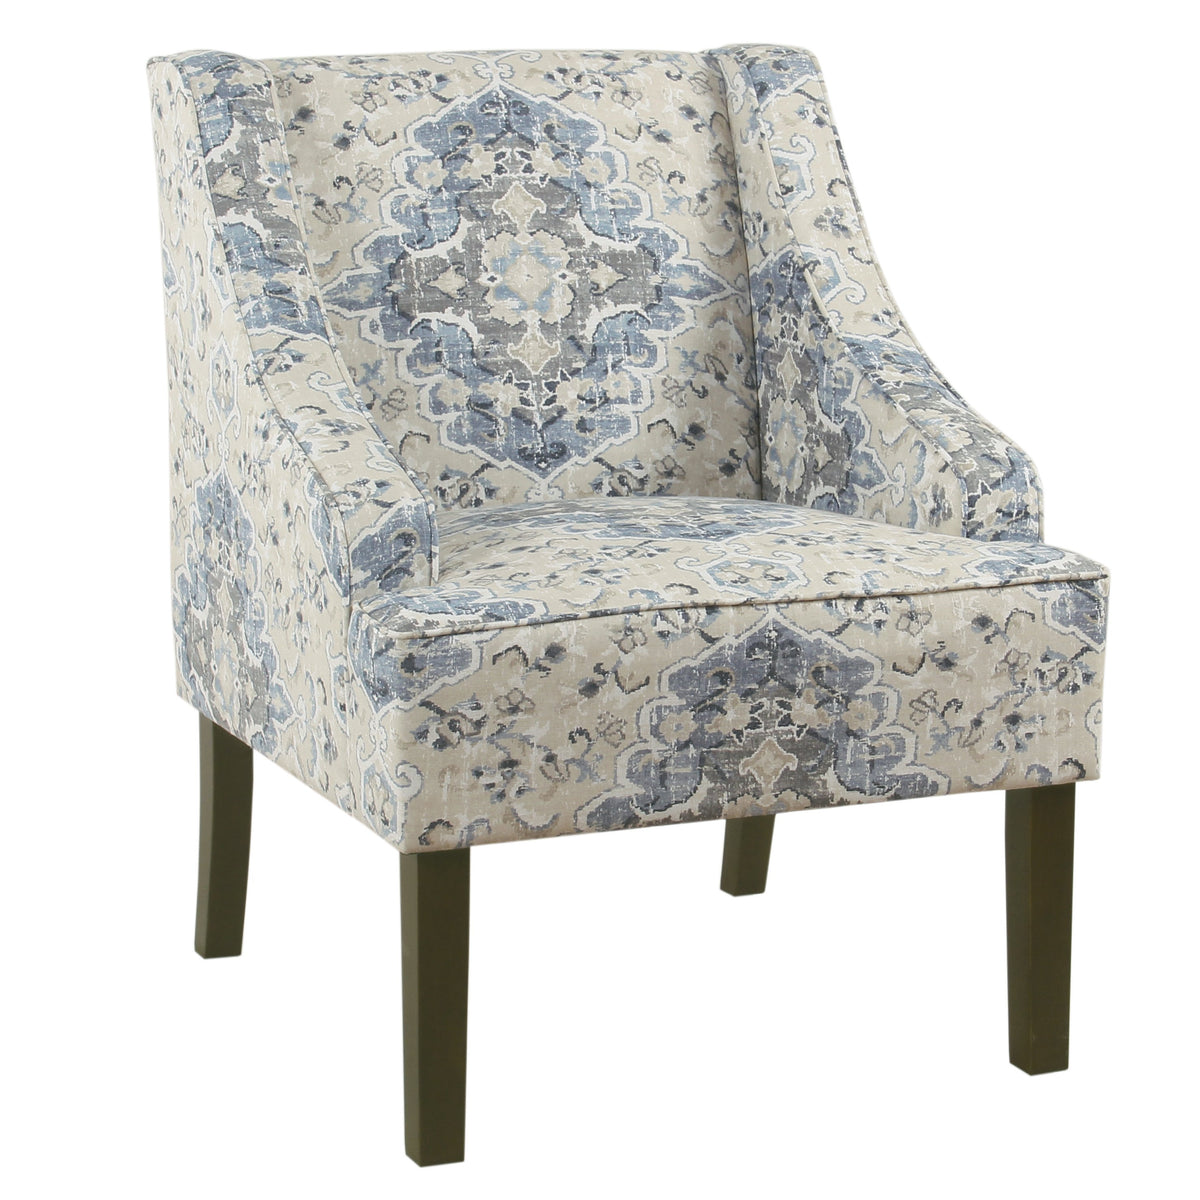 BM194148 - Fabric Upholstered Wooden Accent Chair with Swooping Armrests, Blue, Cream and Brown